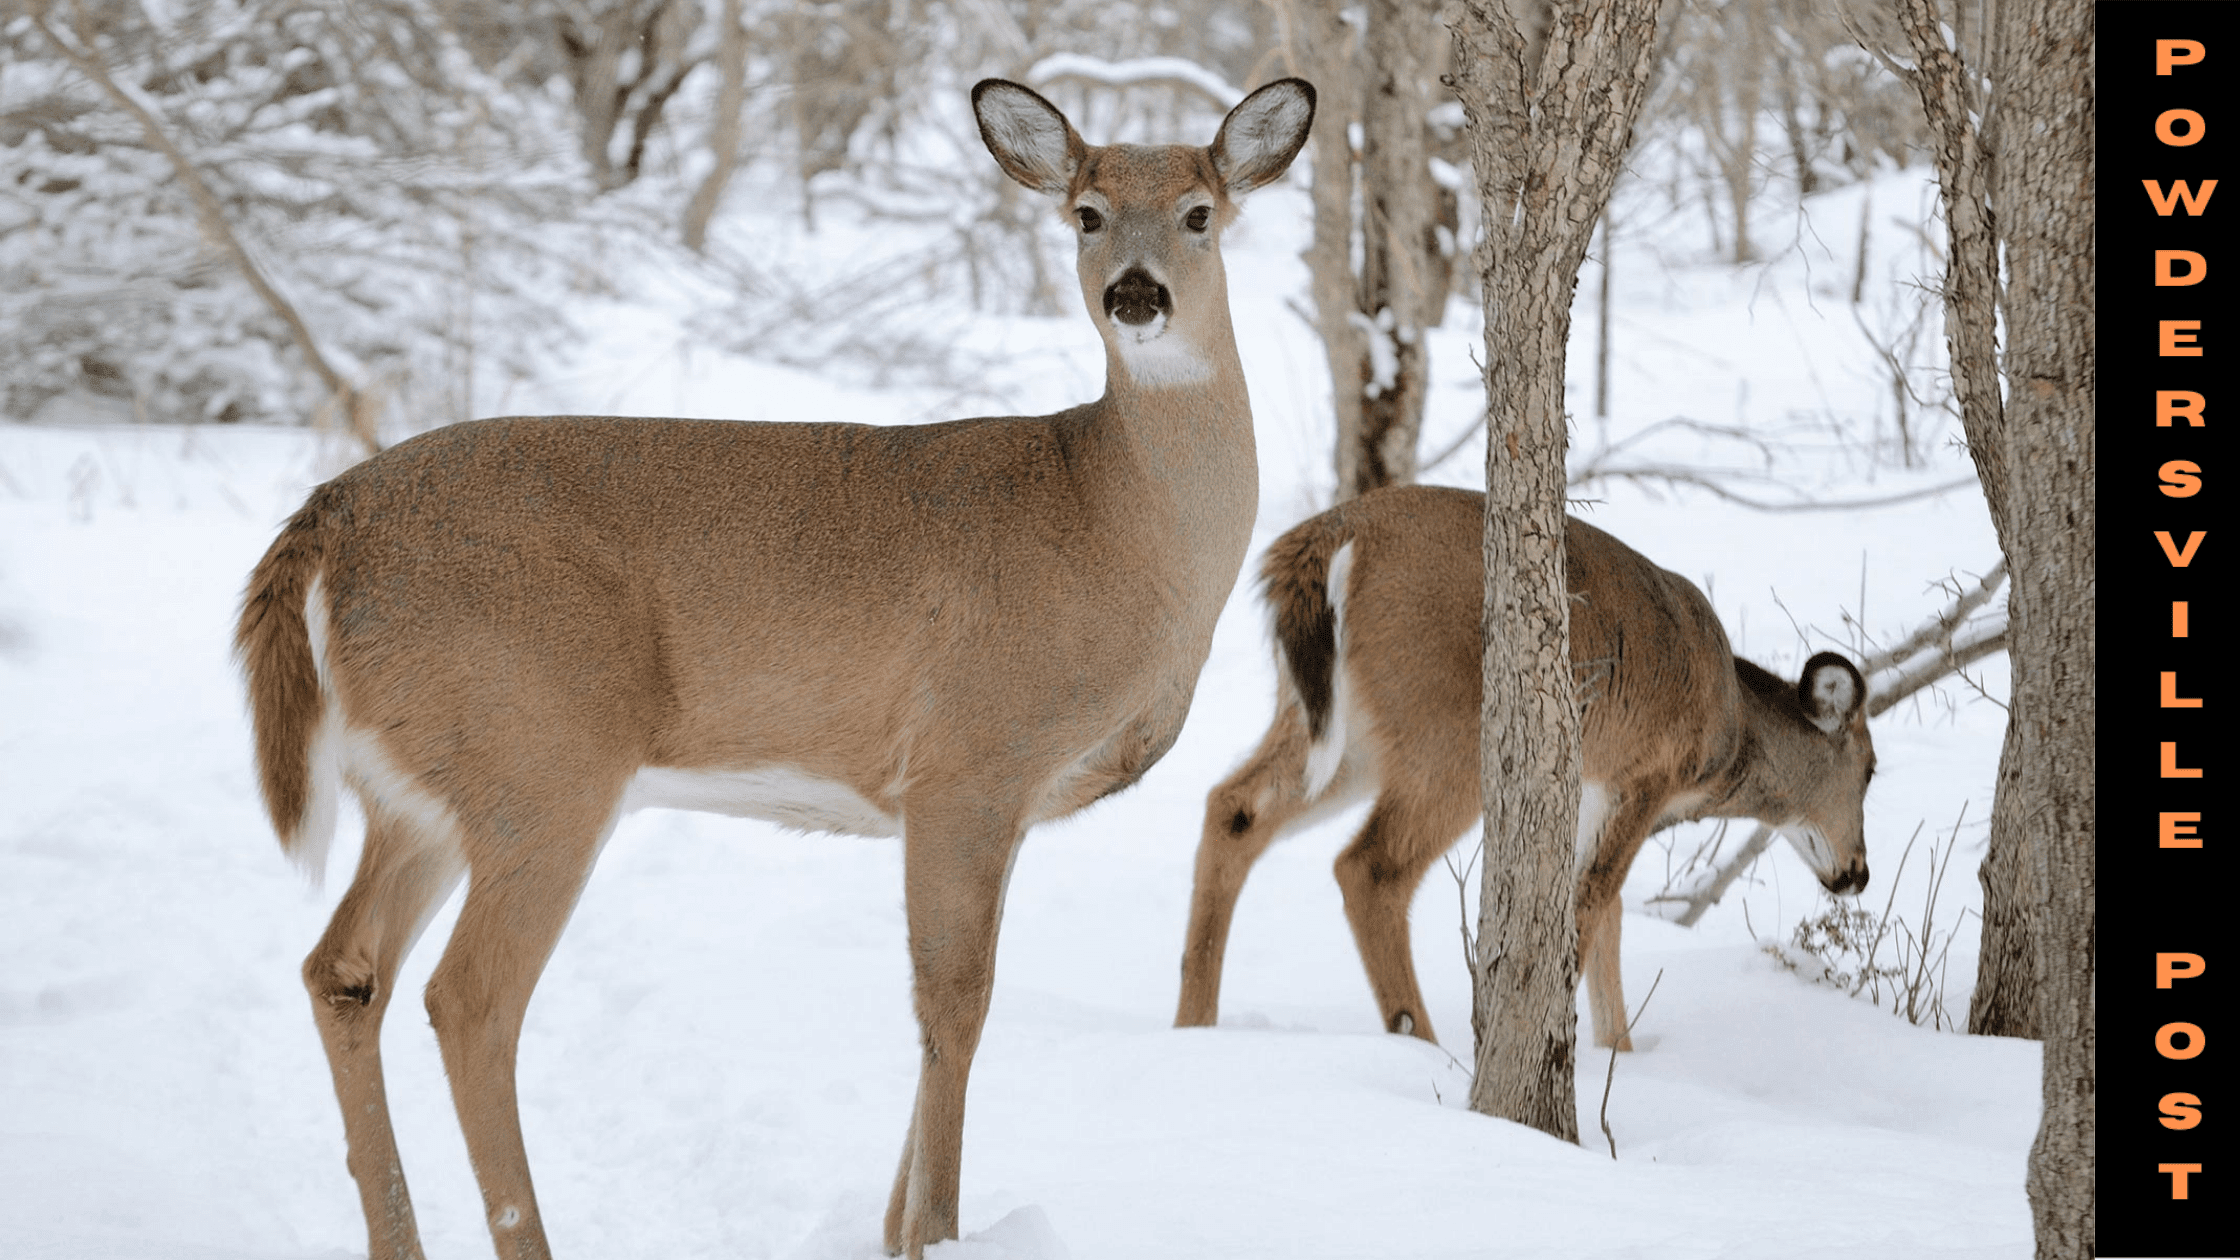 A New Coronavirus Variant Found In Deer Was Passed On To A Human